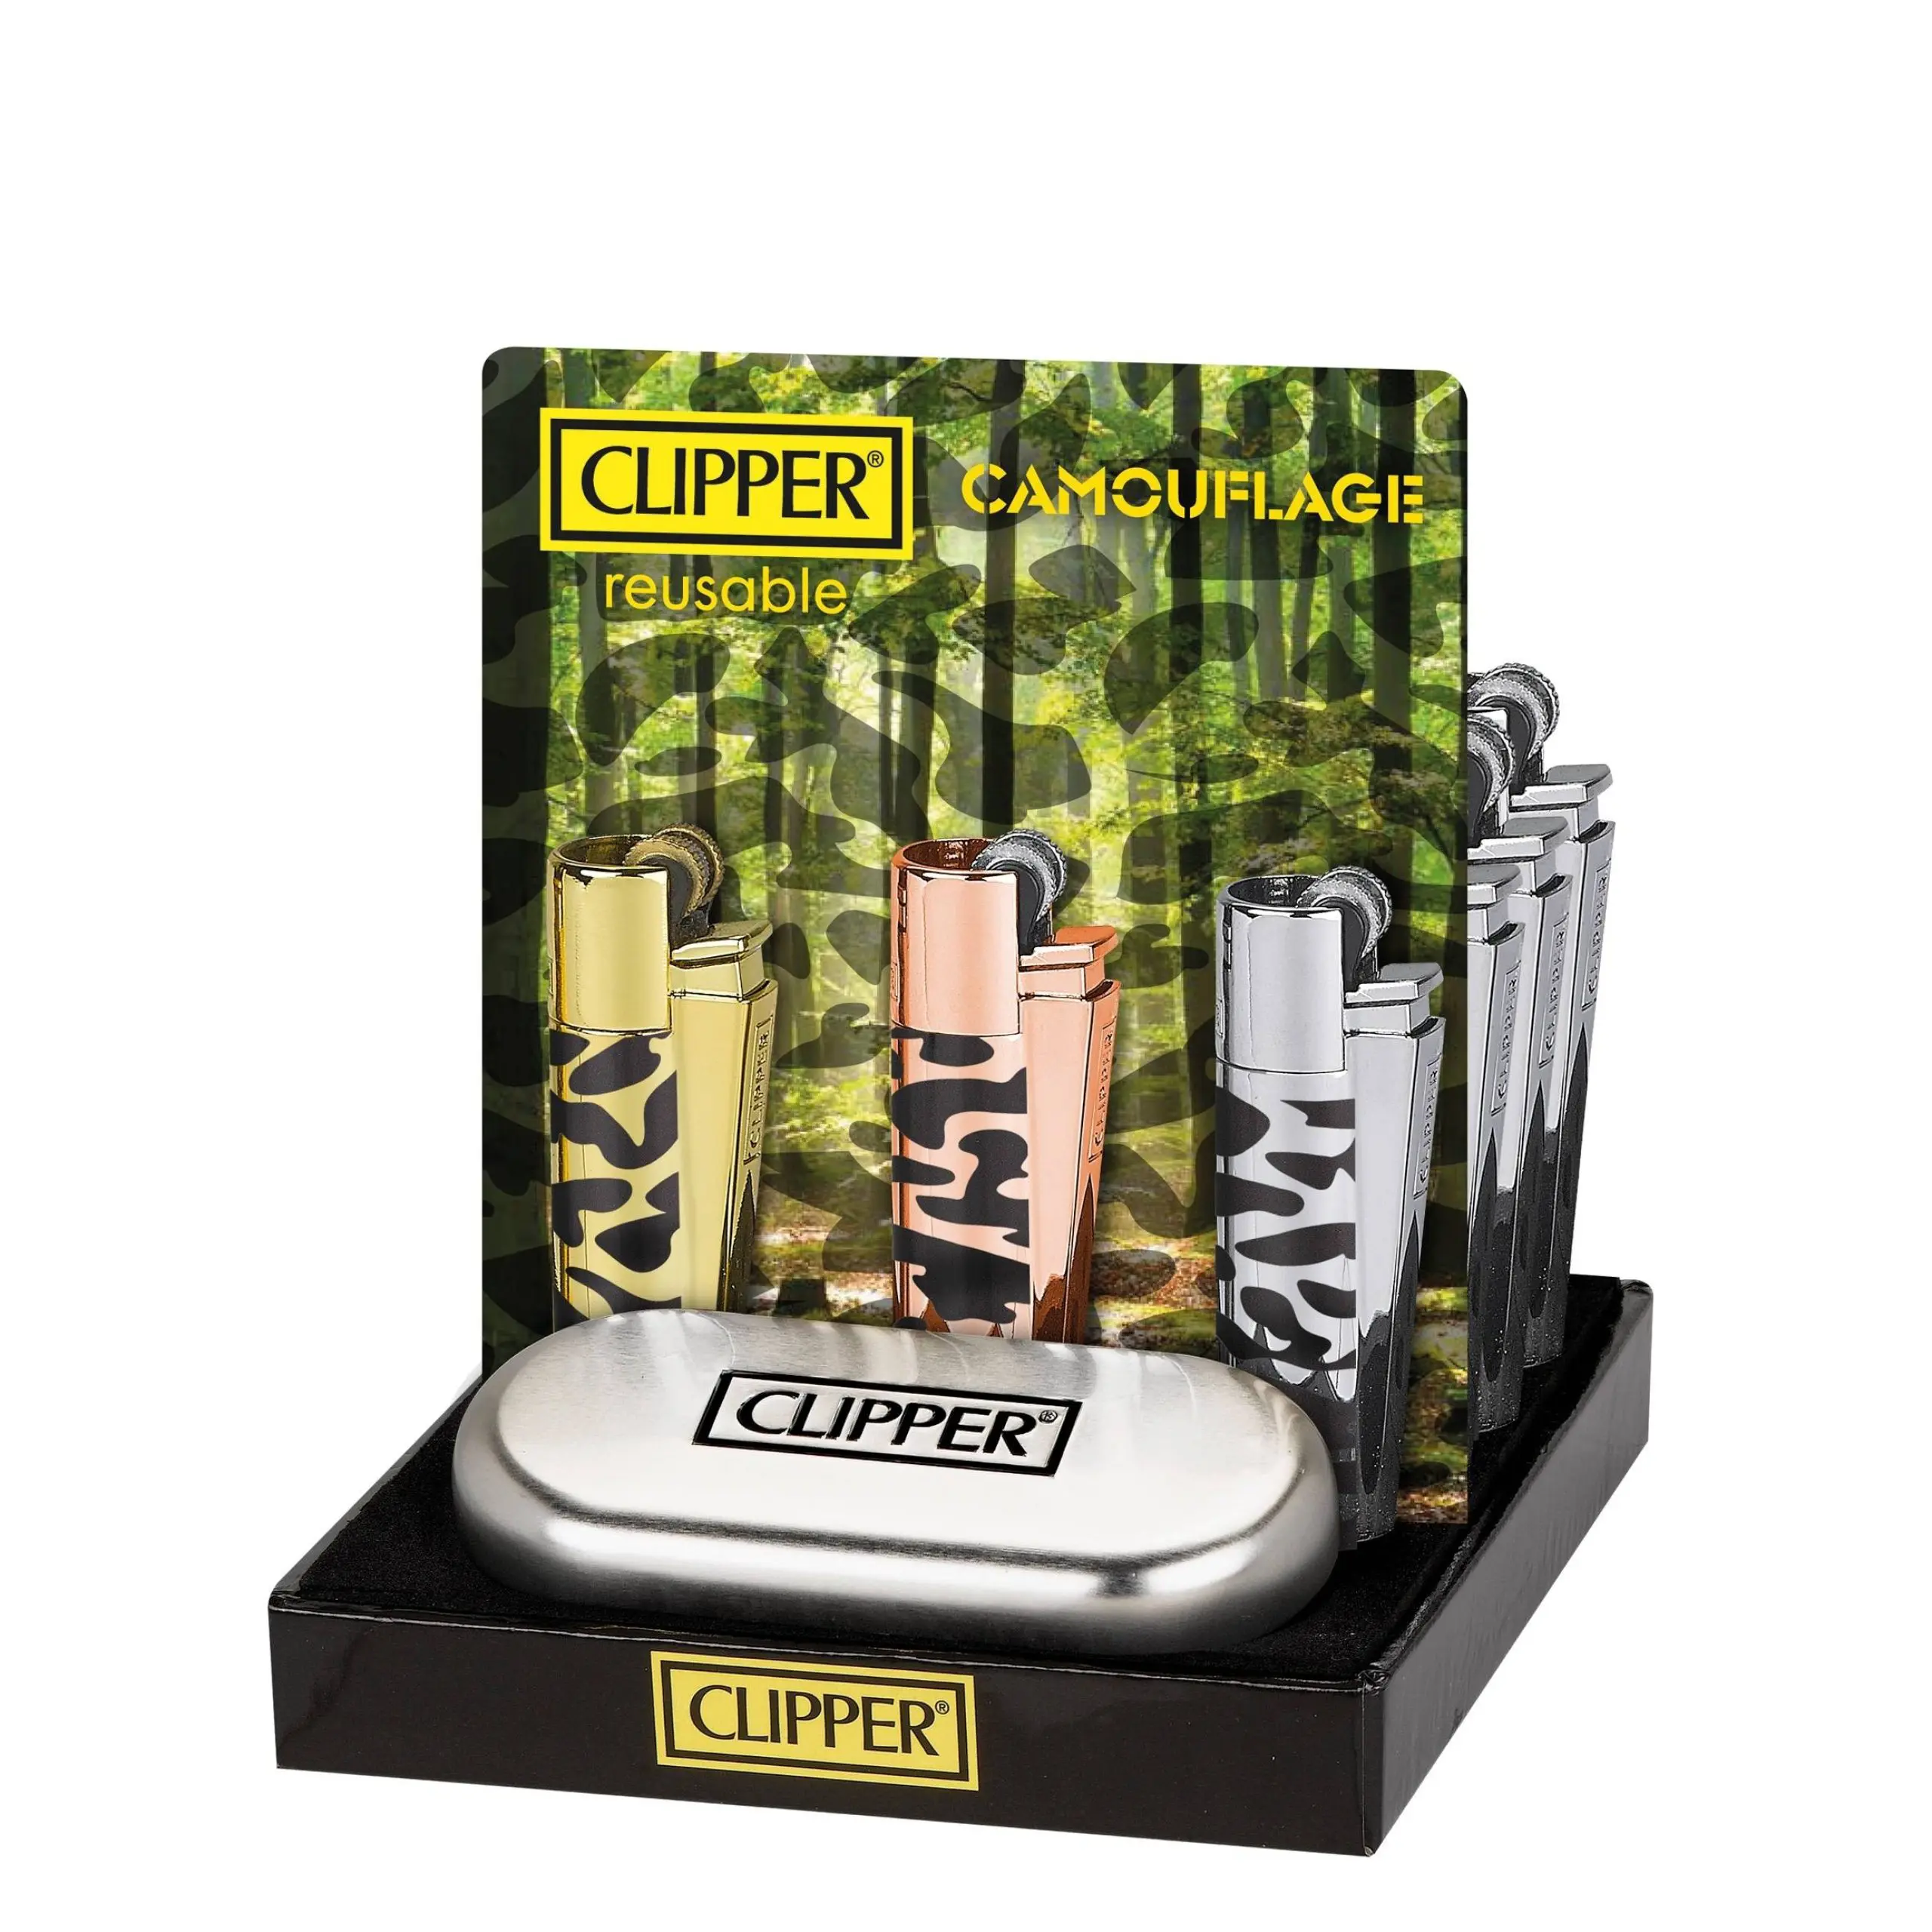 CLIPPER LIGHTERS HOT STAMP METAL GIFT CAMOUFLAGE  – 12PK